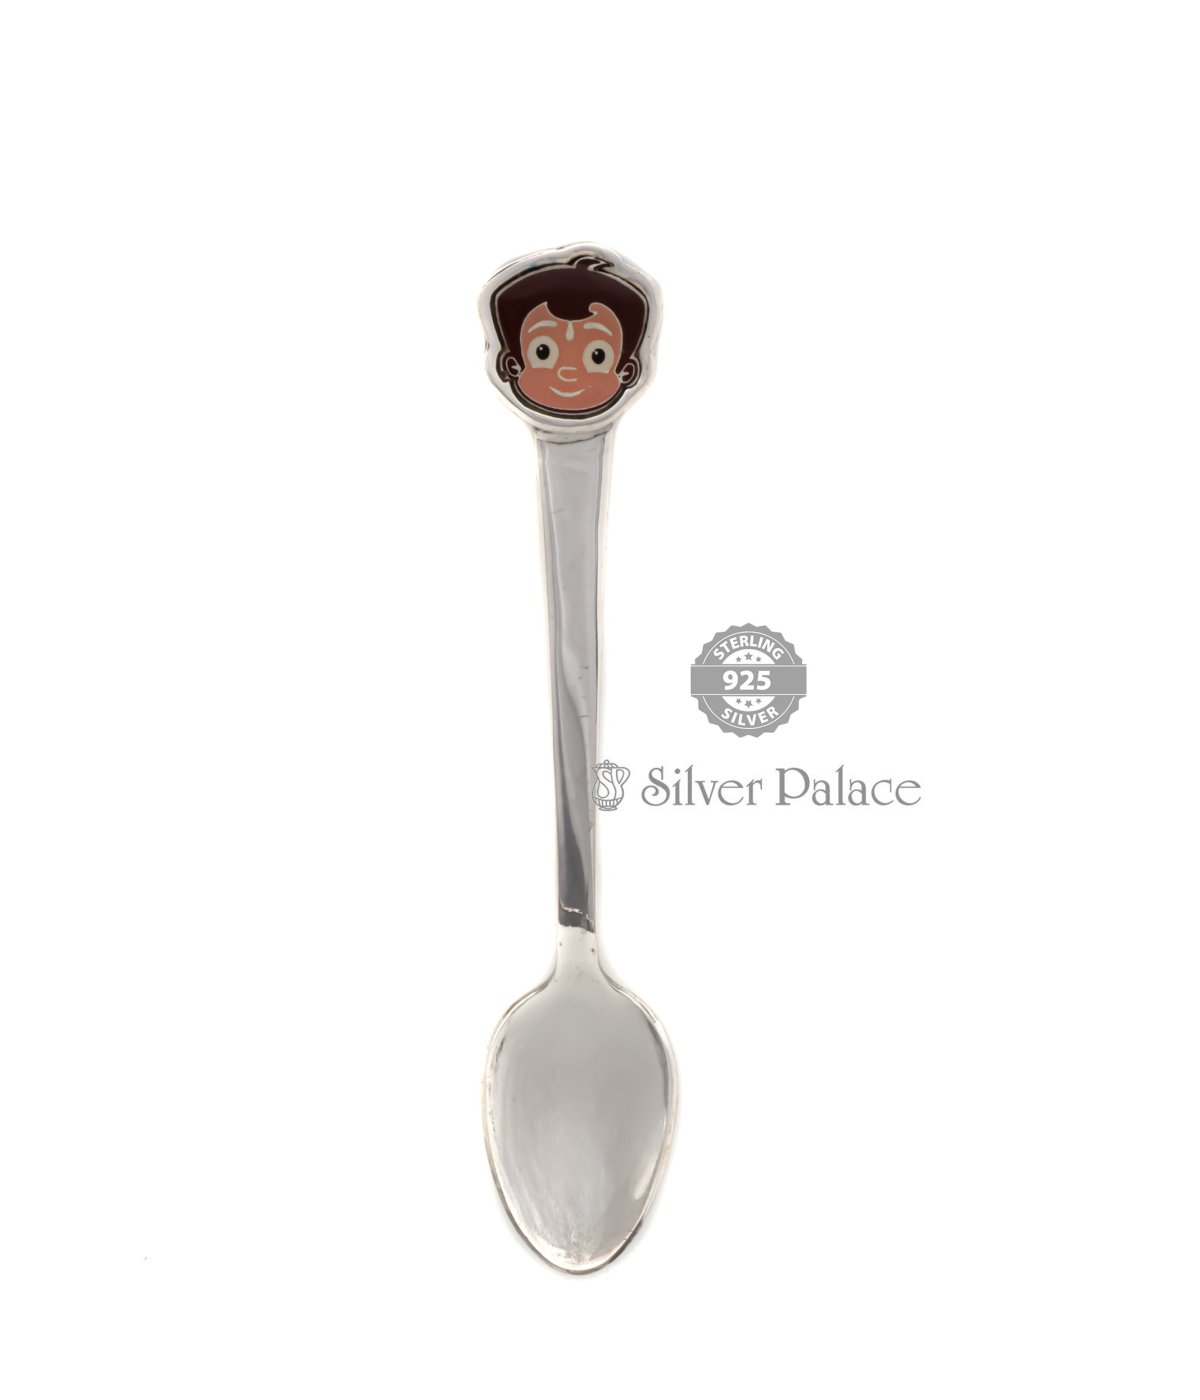  925 SILVER SPOON FOR BABY WITH CHOTA BHEEM HEAD